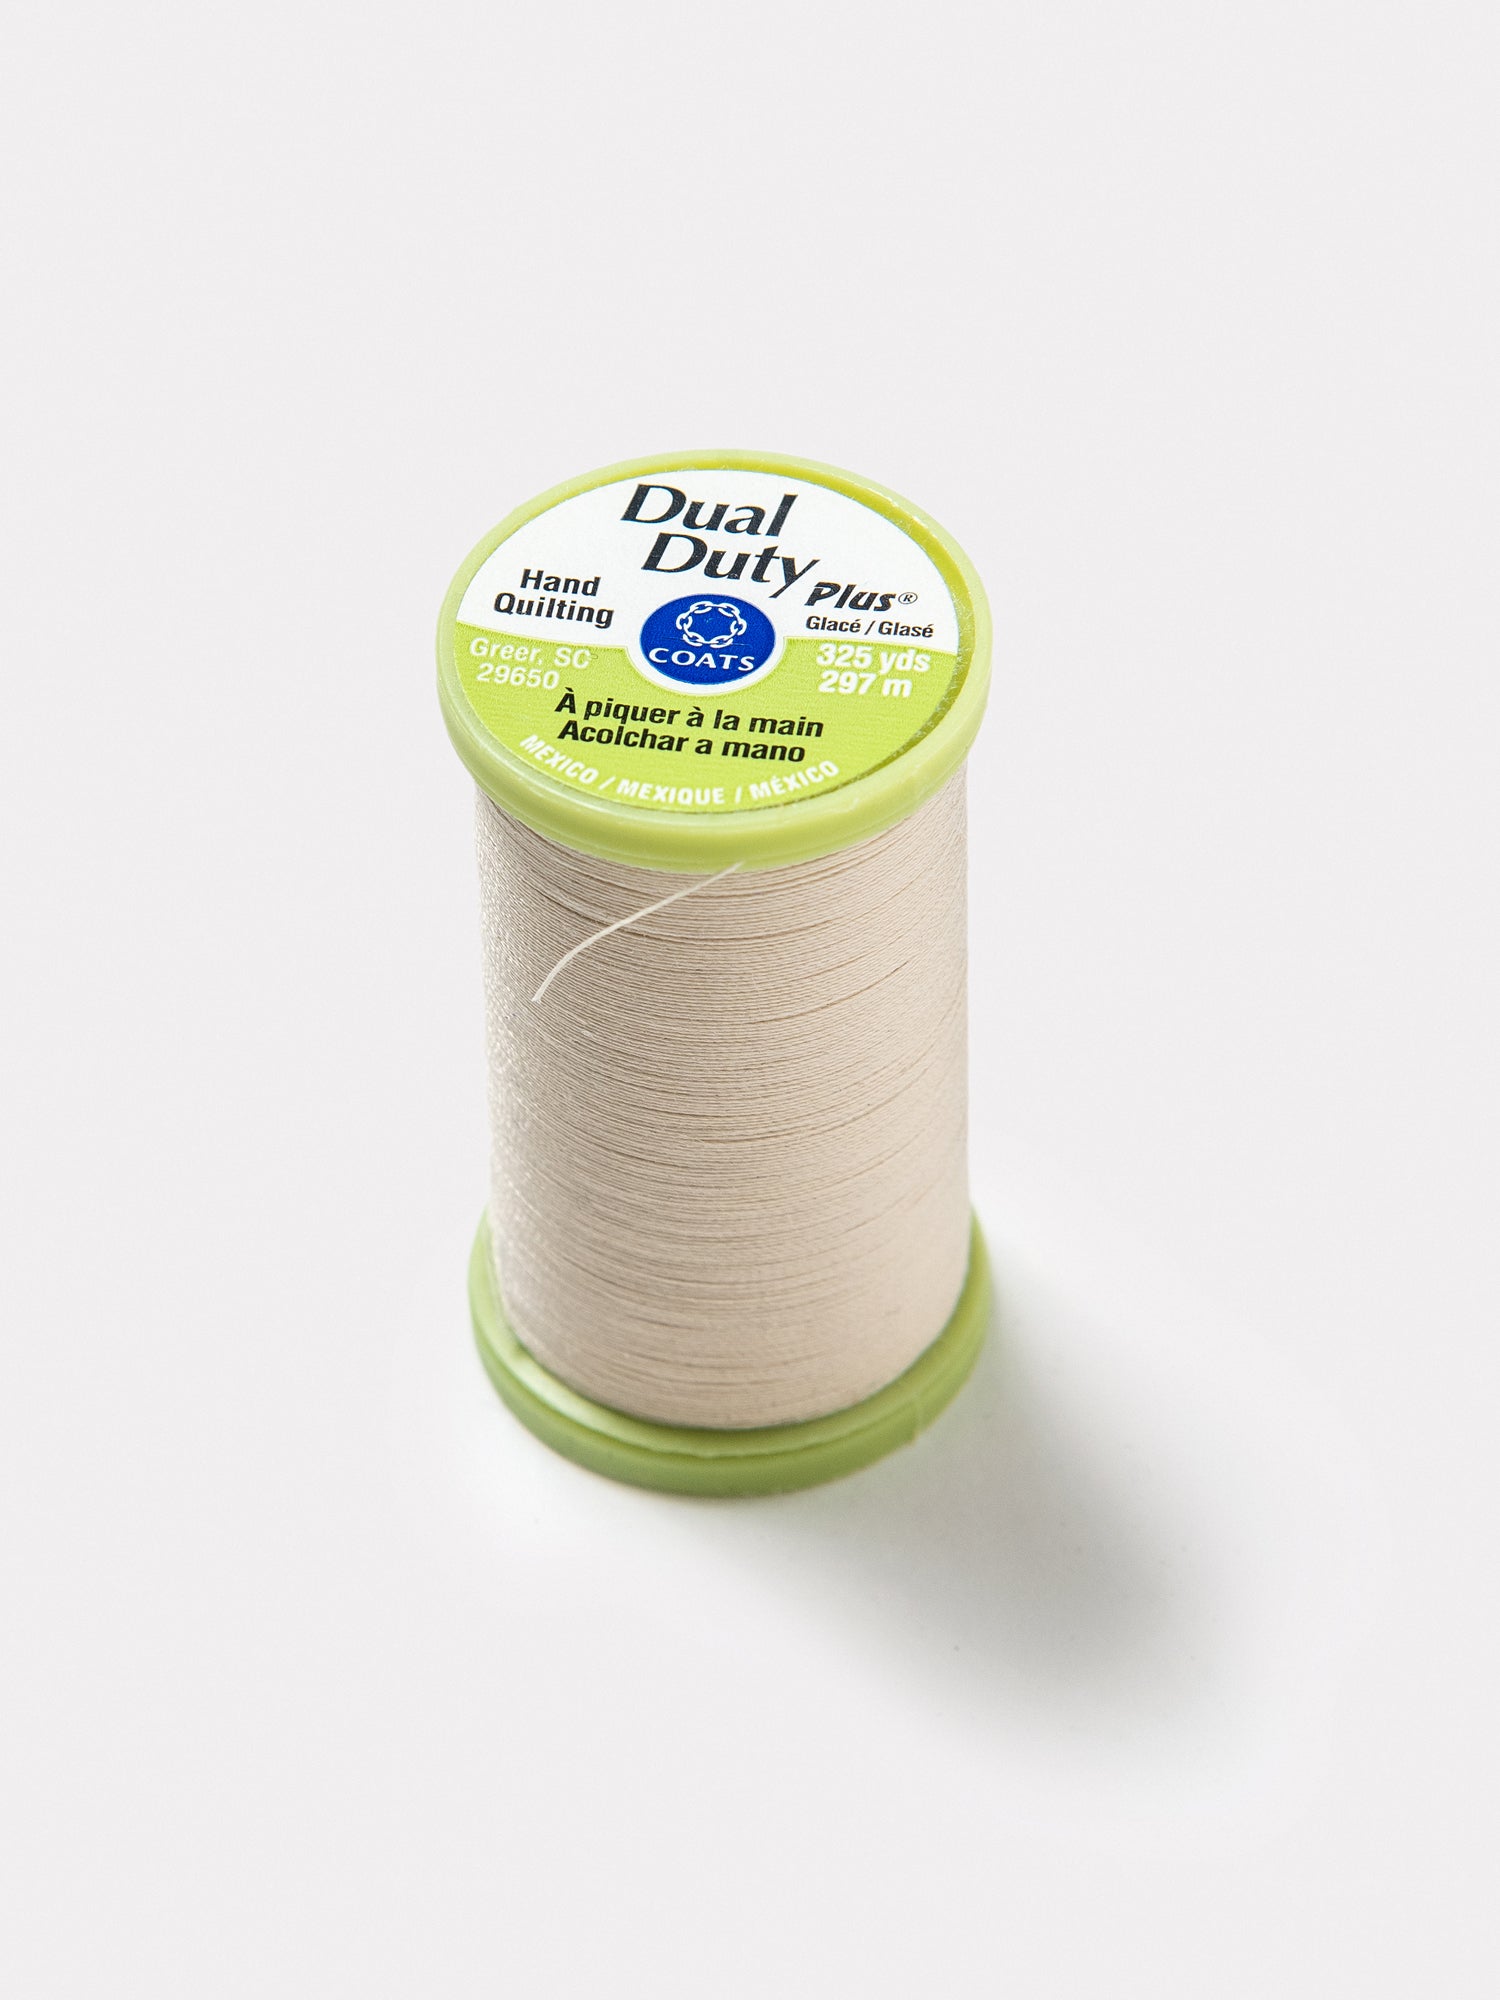 Coats Dual Duty Plus Hand Quilting Thread 325yd-Field Green, 1 count -  Ralphs